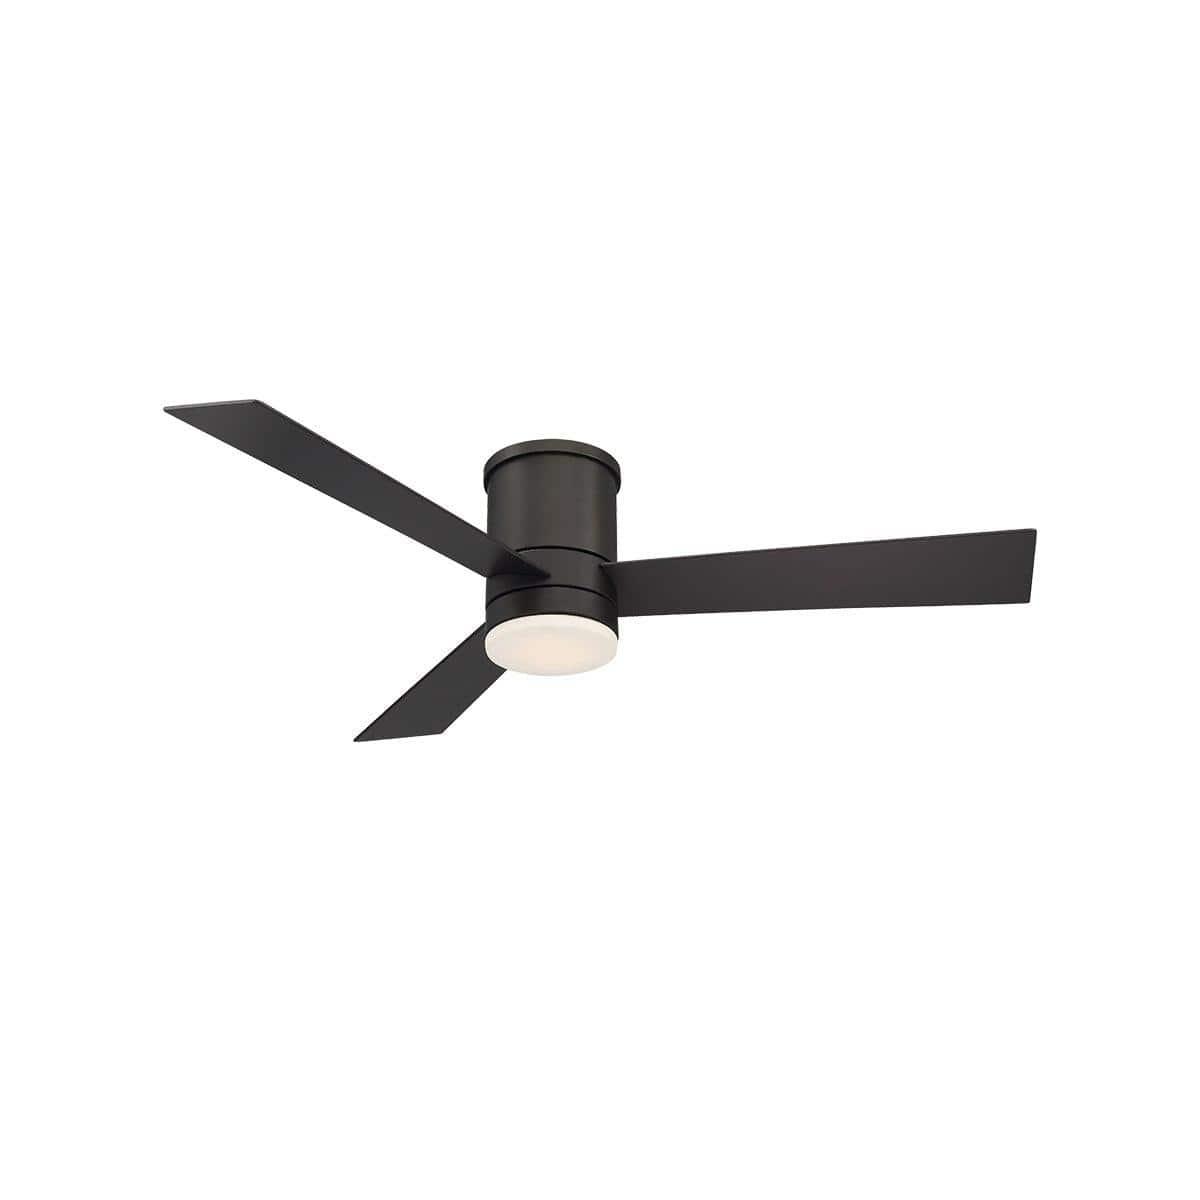 Modern Forms - Axis Flush Ceiling Fan - FH-W1803-52L-MB | Montreal Lighting & Hardware